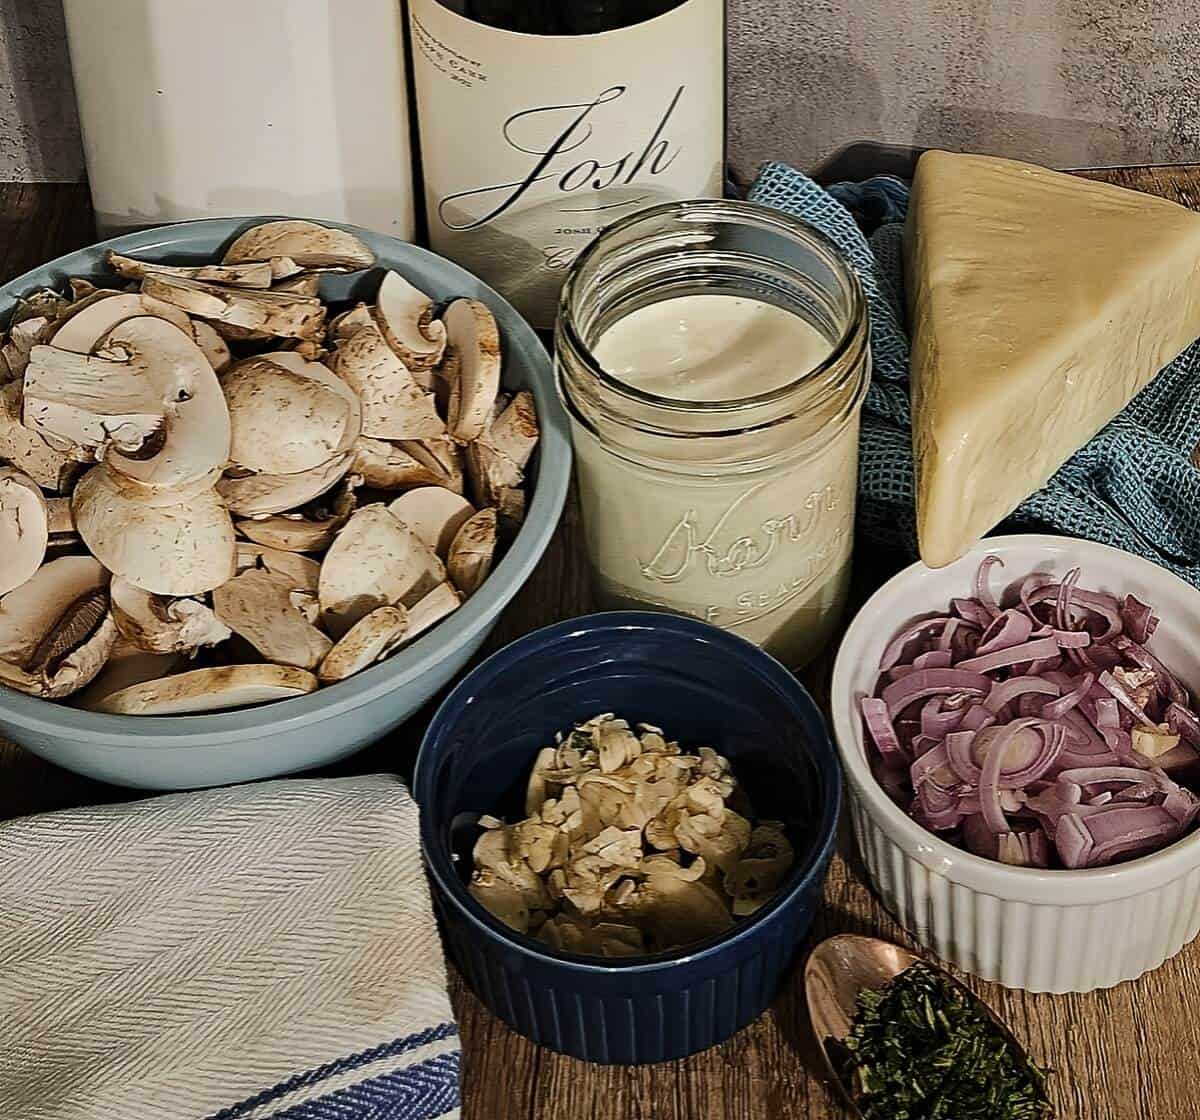 ingredients for creamy mushroom asiago soup; sliced mushrooms, cream and milk, asiago cheese, white wine, sliced shallots, chopped rosemary, and sliced garlic